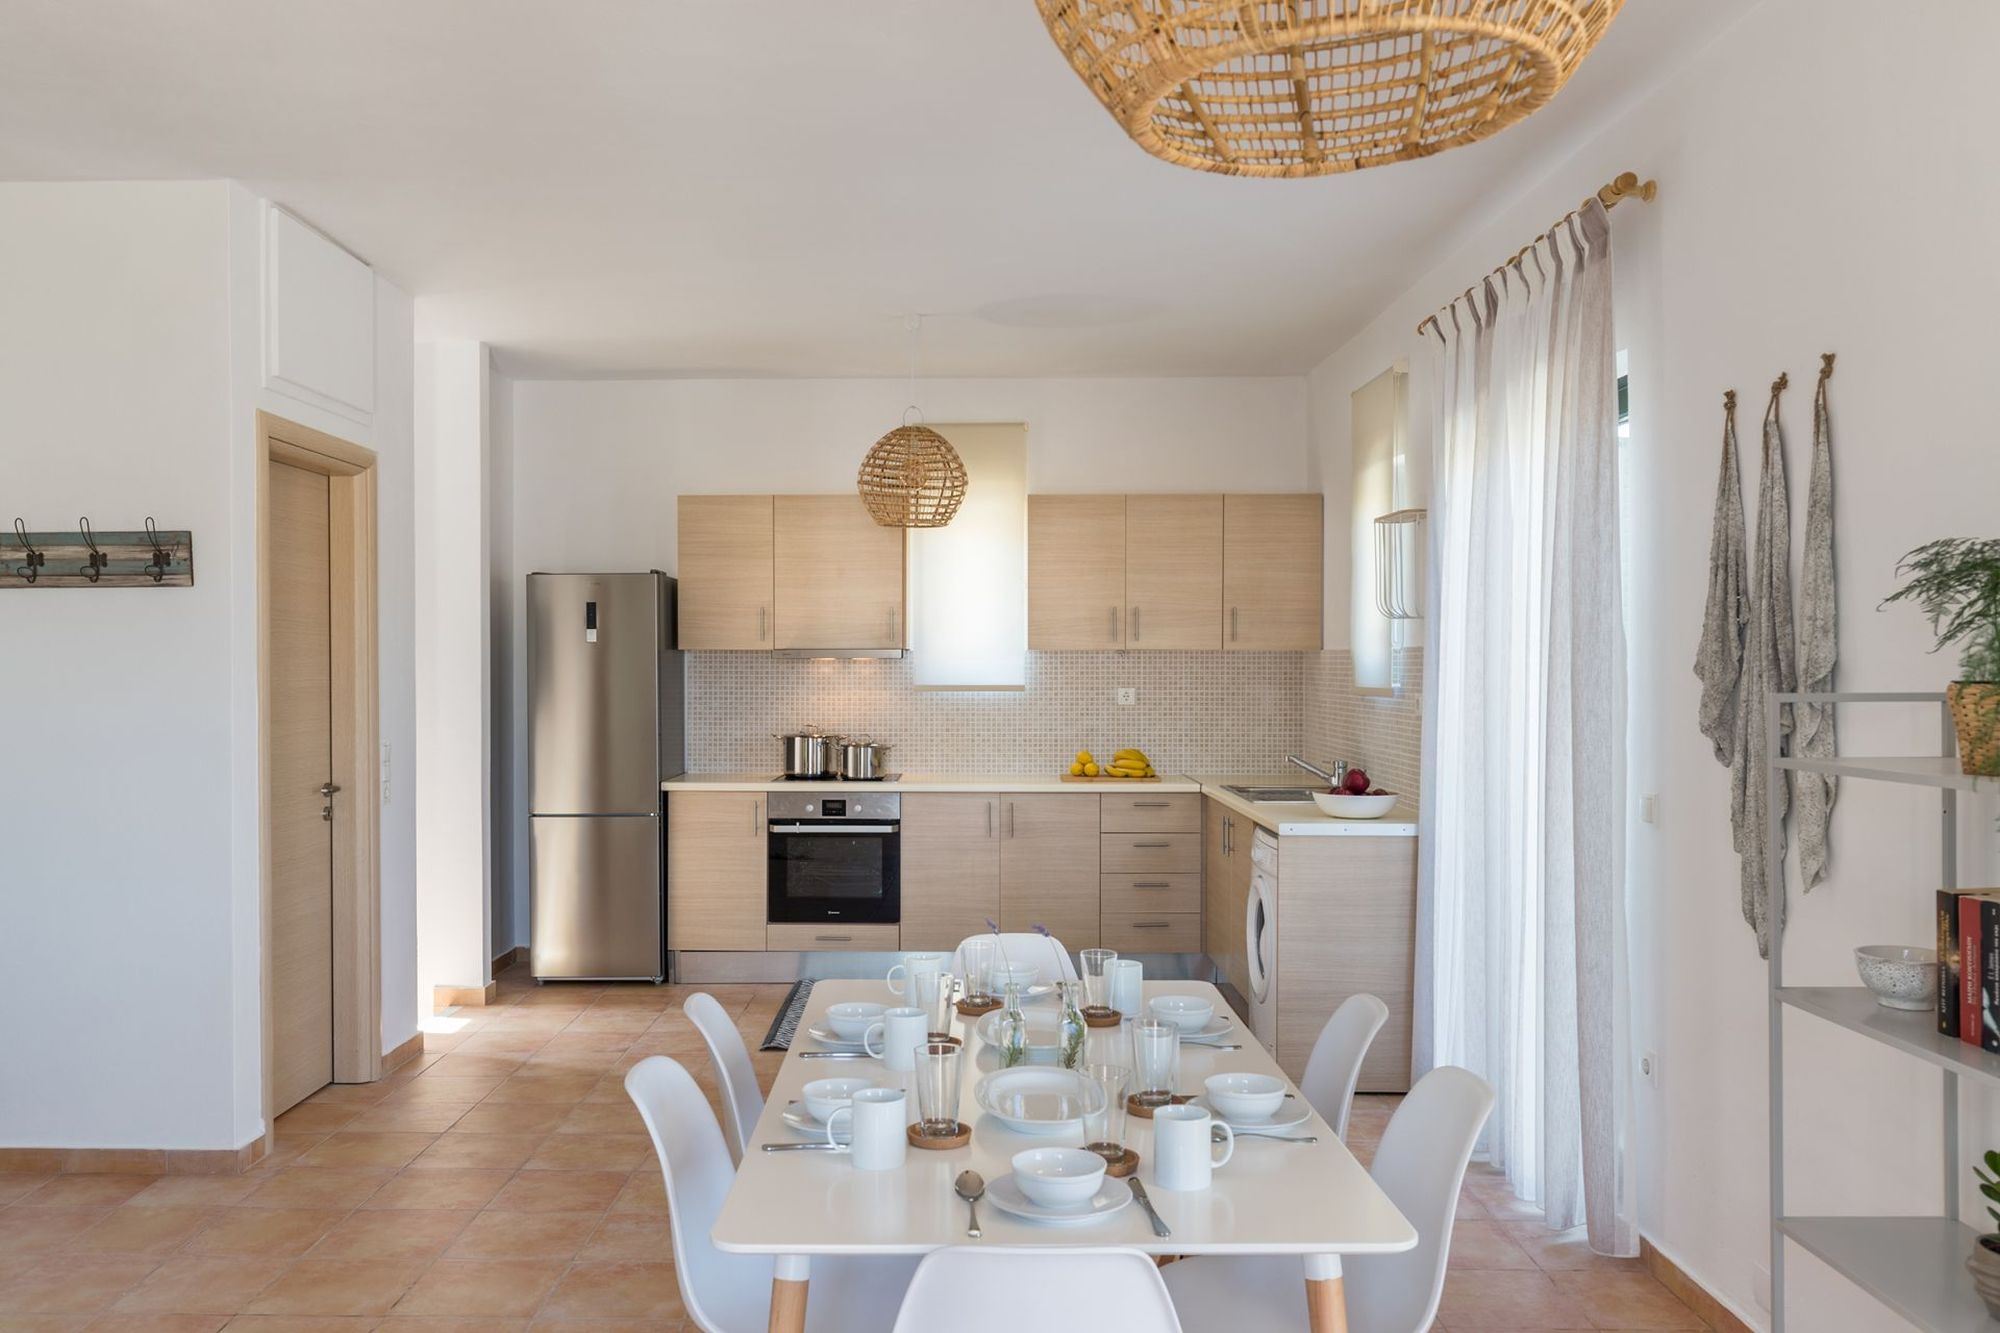 The kitchen and the white dining table of a residence decorated in earth tones.